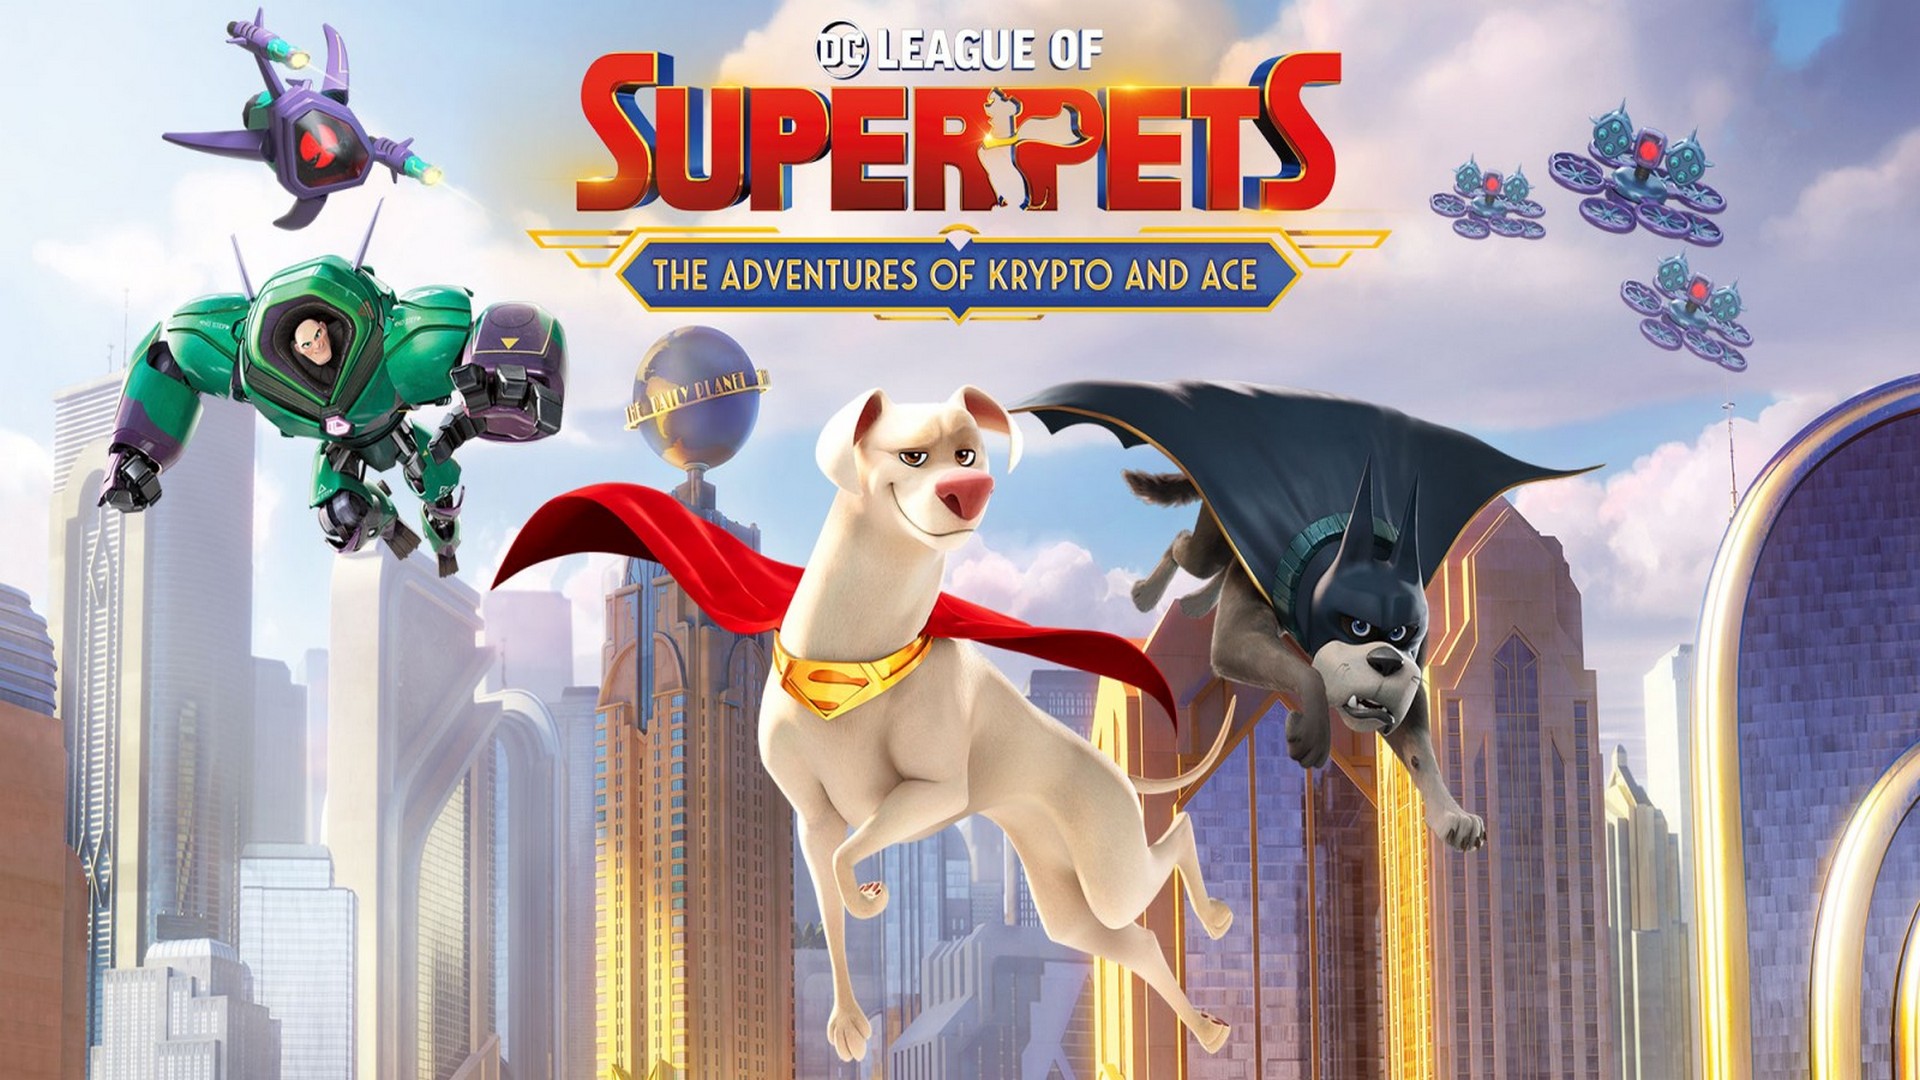 Review - DC League of Super-Pets: The Adventures of Krypto and Ace